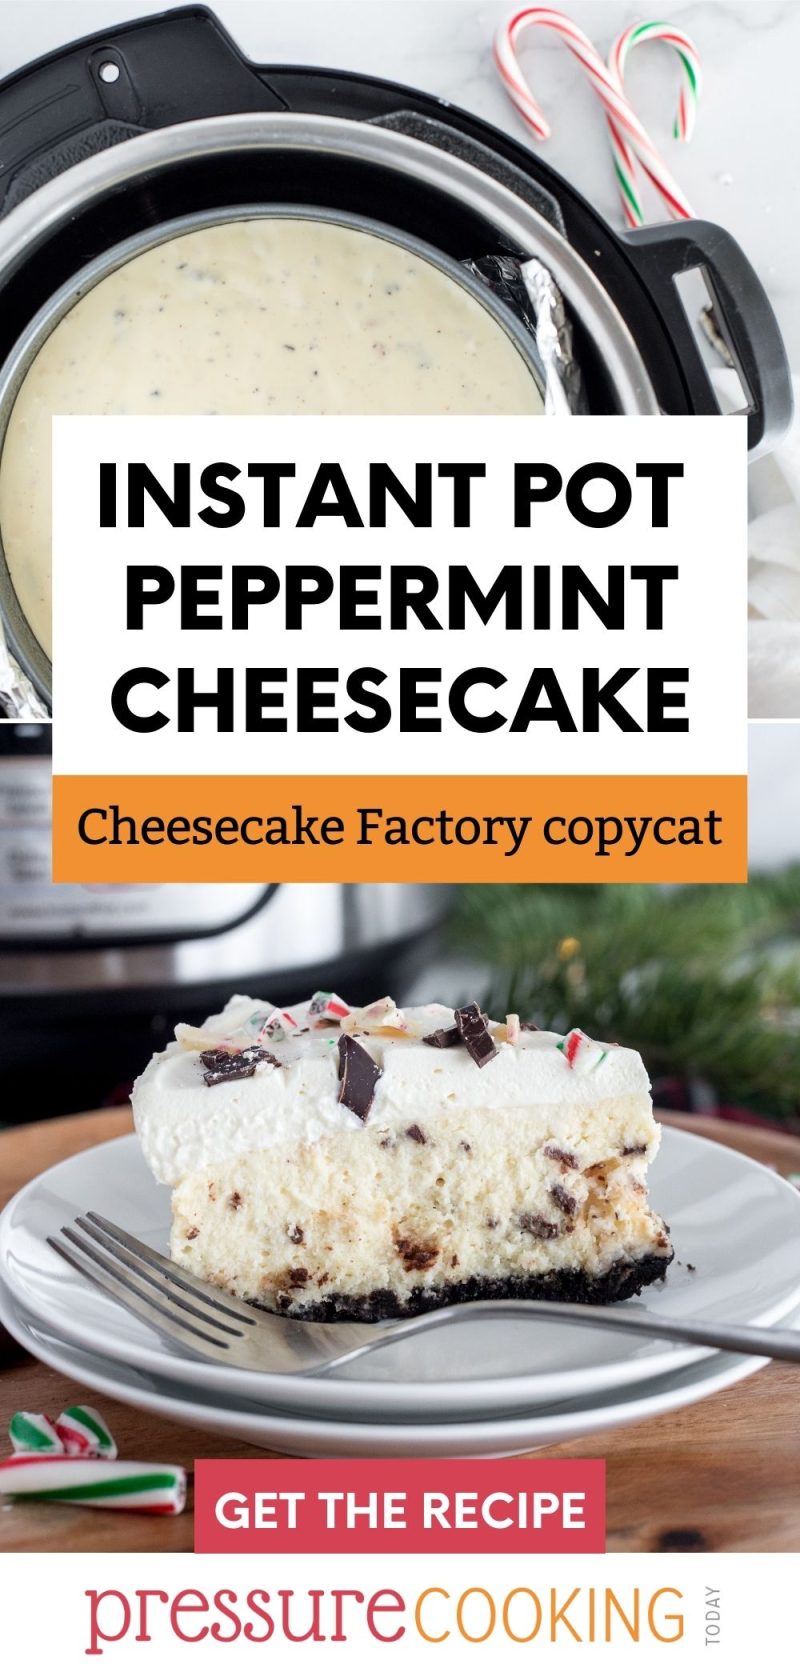 pinterest image that reads "Instant Pot Peppermint Cheesecake: Cheesecake Factory copycat over two photos of the cheesecake